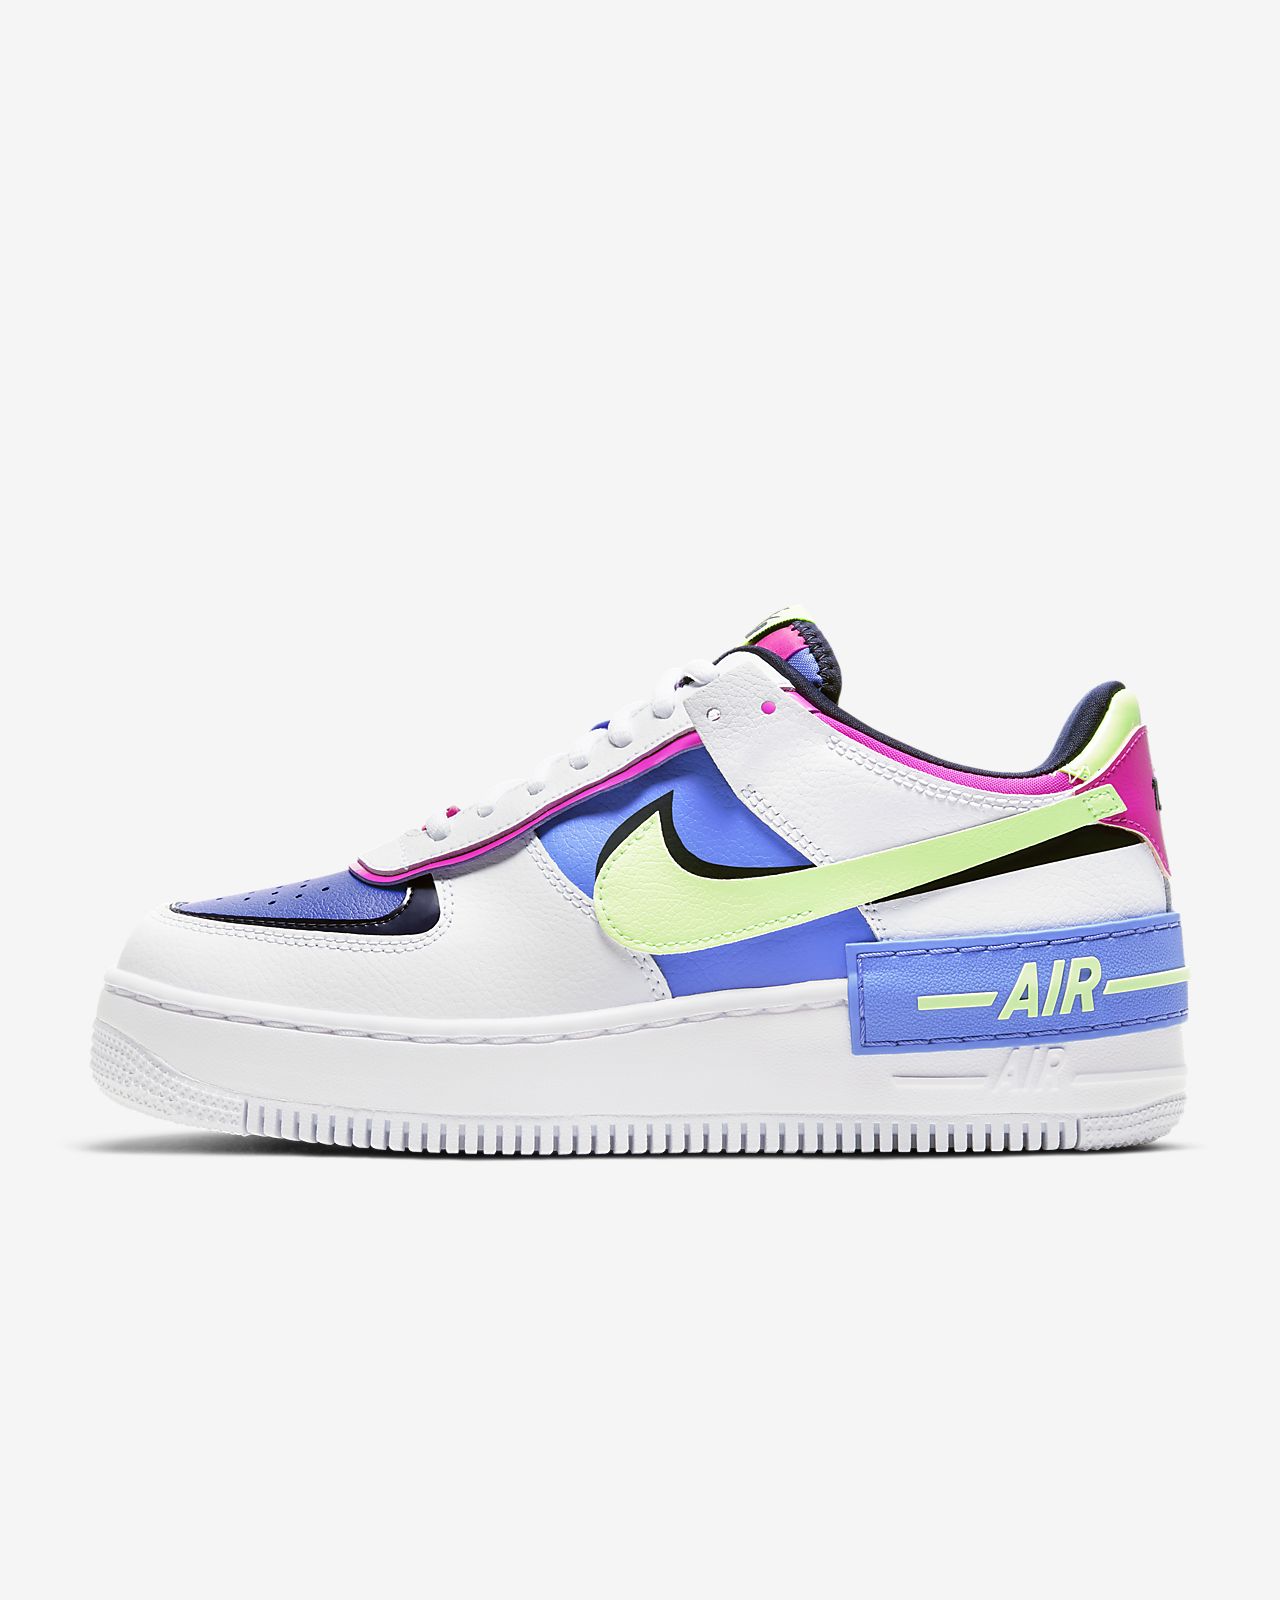 vein Twisted Sidewalk Nike Air Force 1 Shadow "White Sapphire/Barely Volt" - SNKRS WORLD